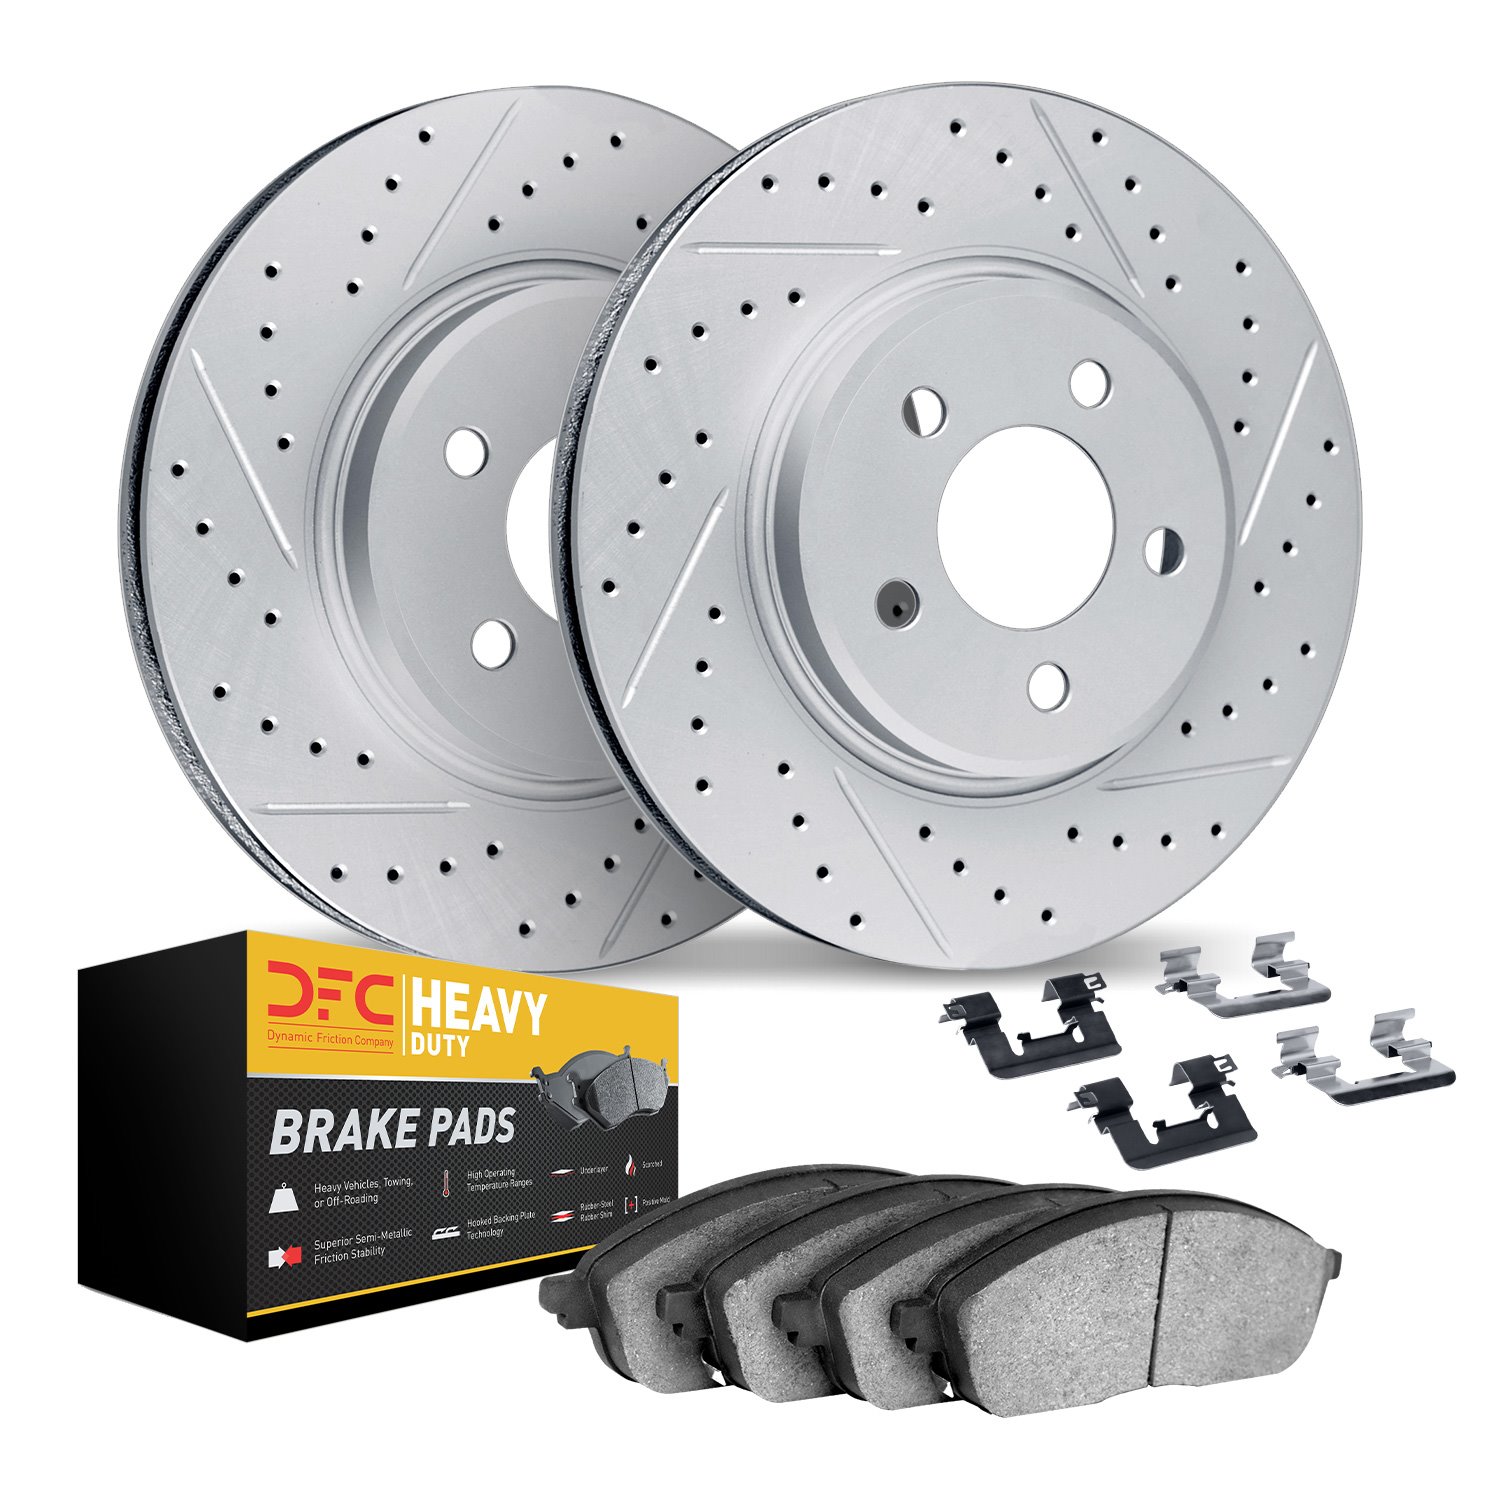 2212-99112 Geoperformance Drilled/Slotted Rotors w/Heavy-Duty Pads Kit & Hardware, 2000-2004 Ford/Lincoln/Mercury/Mazda, Positio